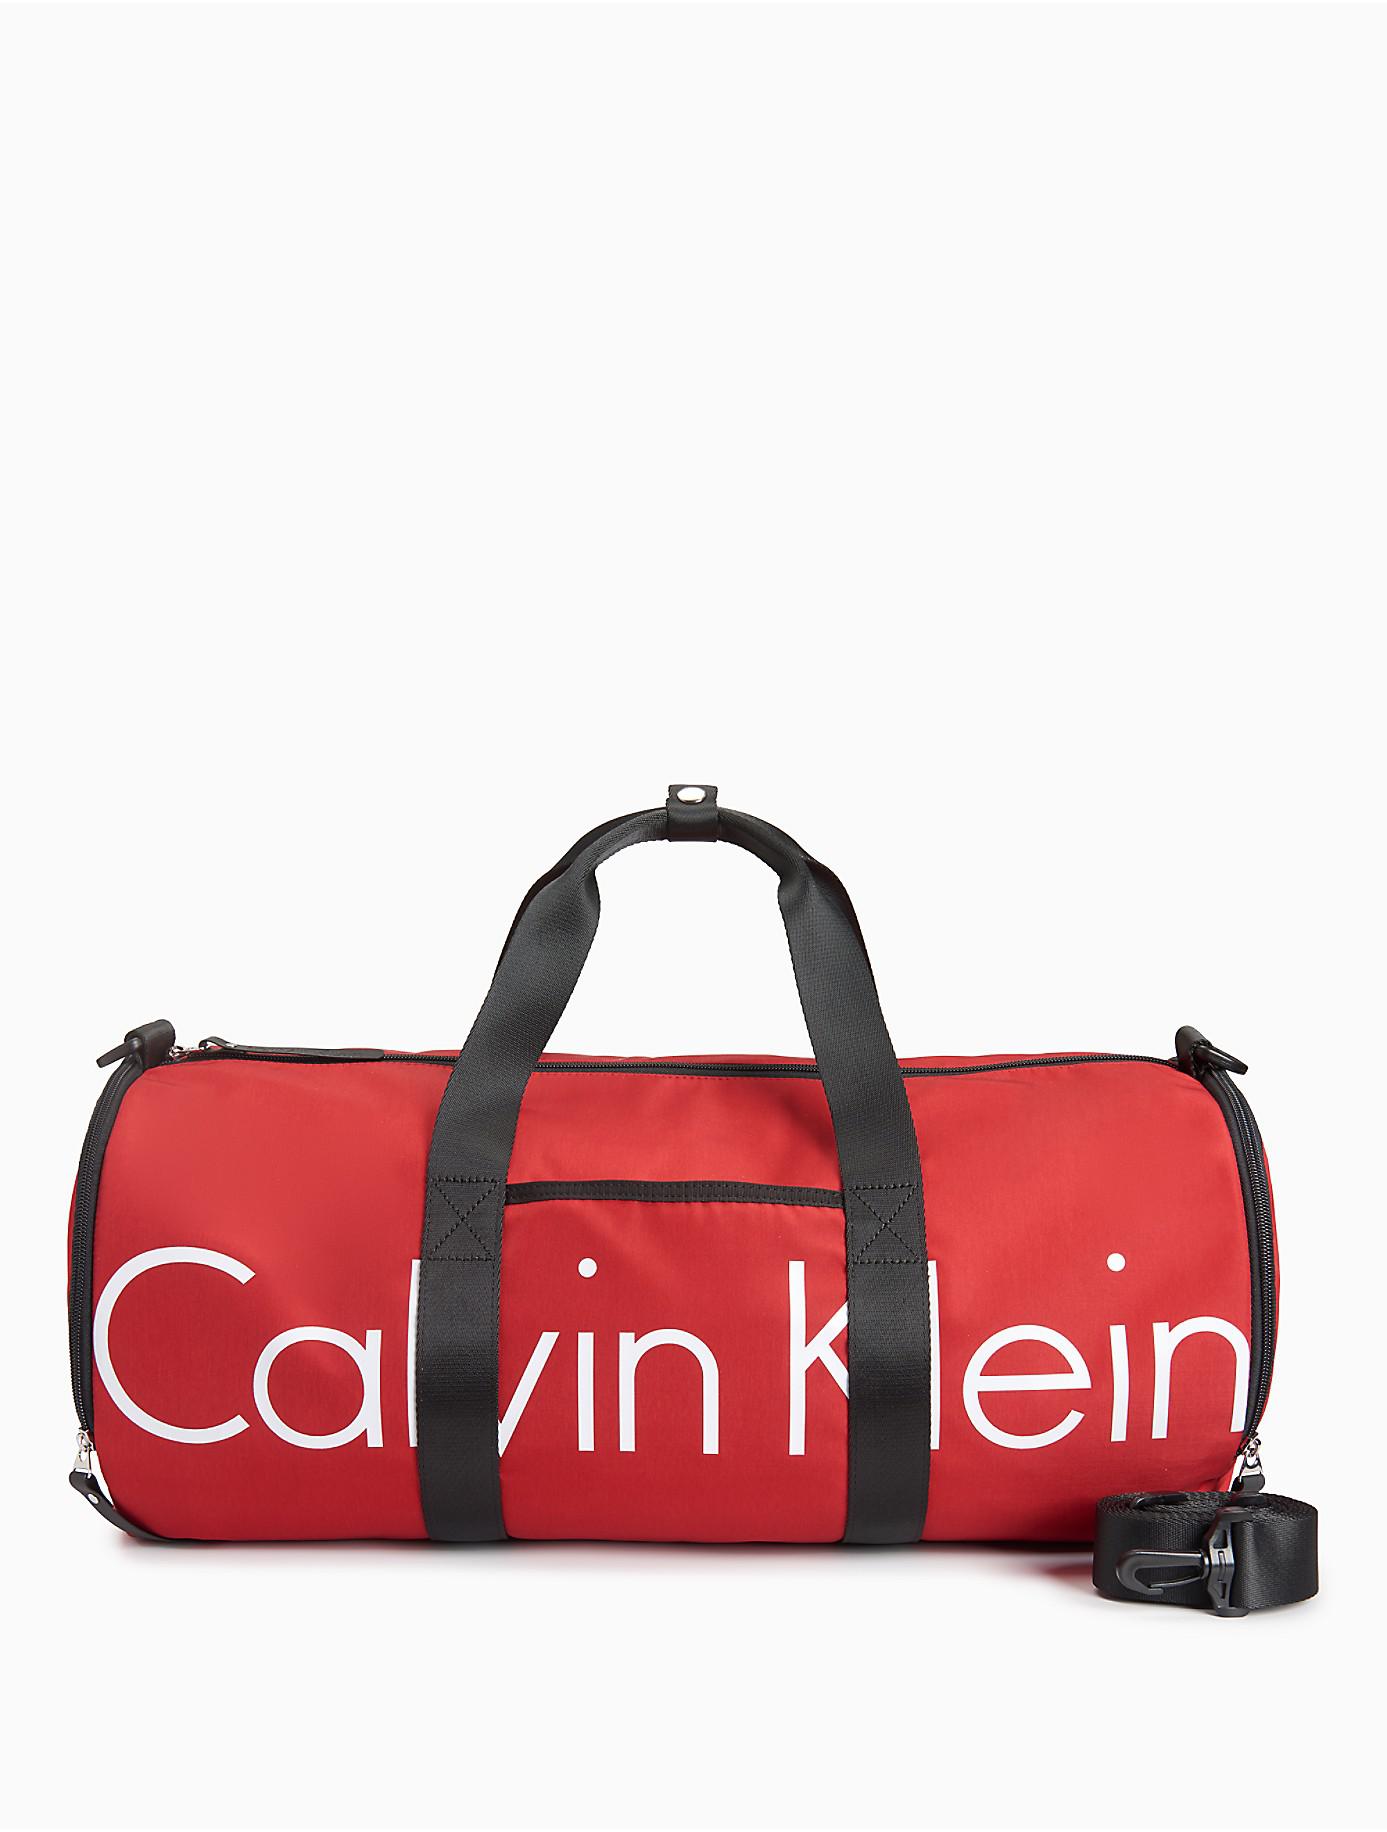 CALVIN KLEIN 205W39NYC Logo Travel Lightweight Duffle Bag in Red for Men -  Lyst